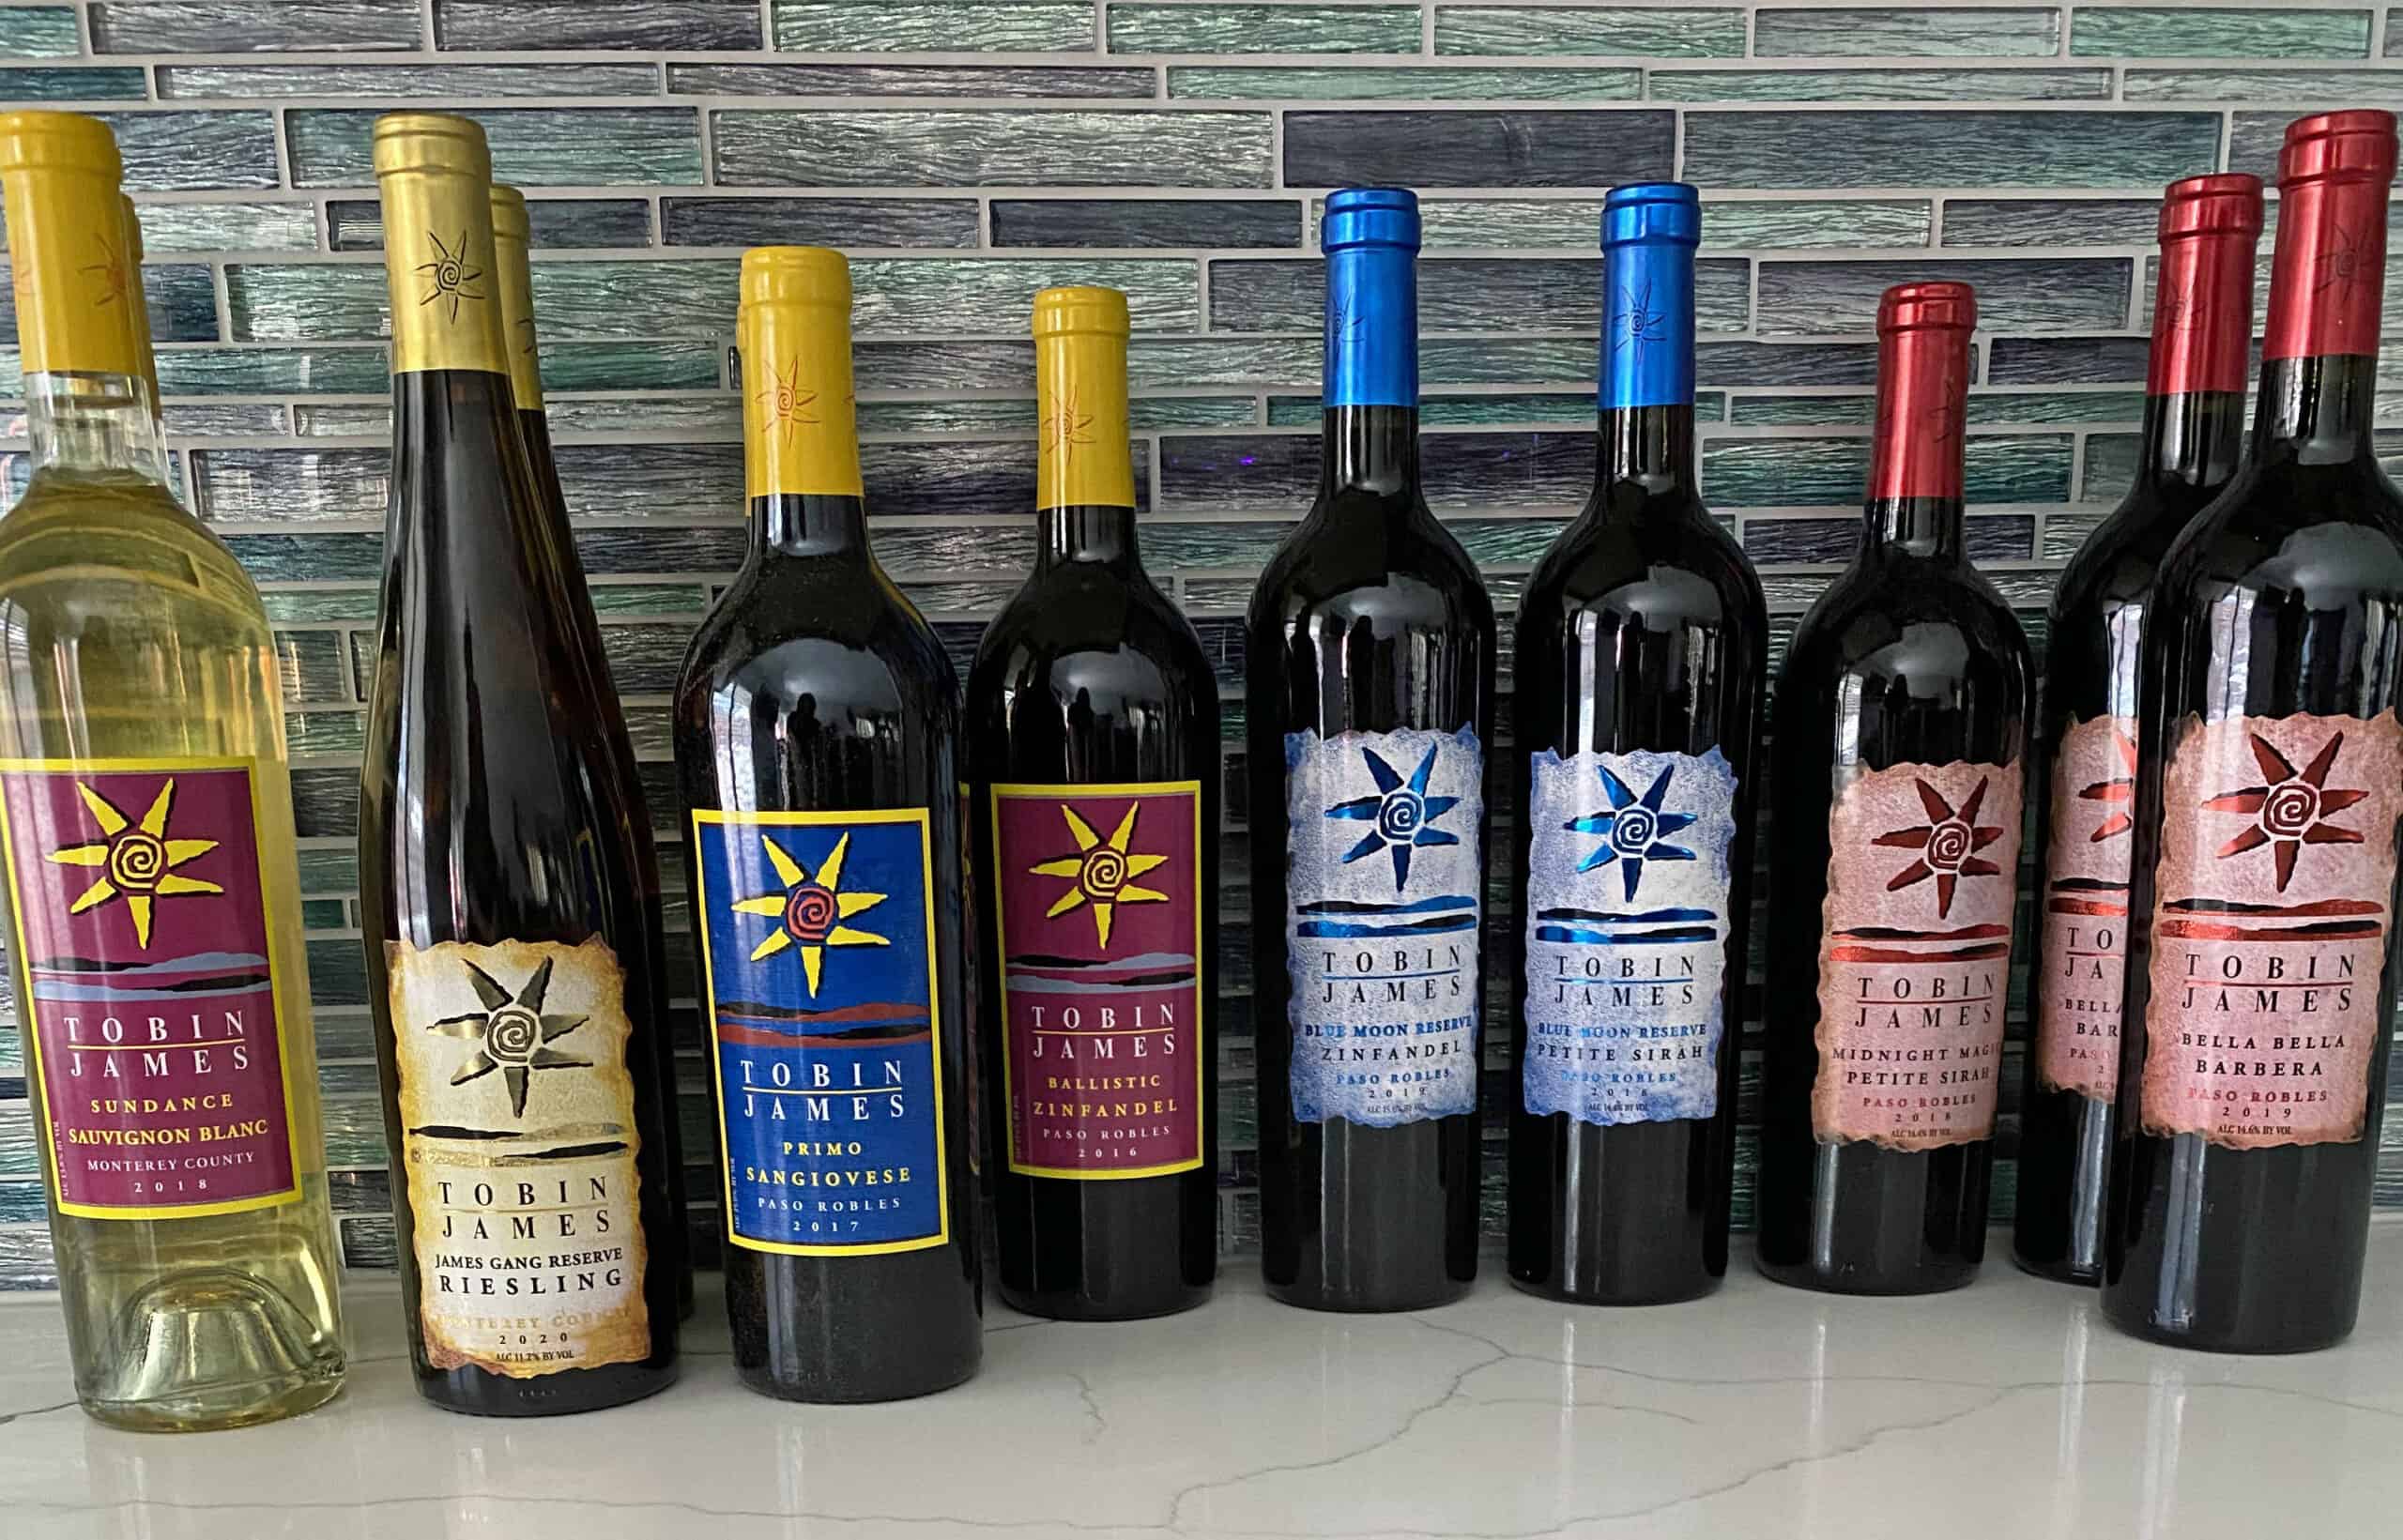 tobin james wines we picked up while wine tasting in Paso Robles